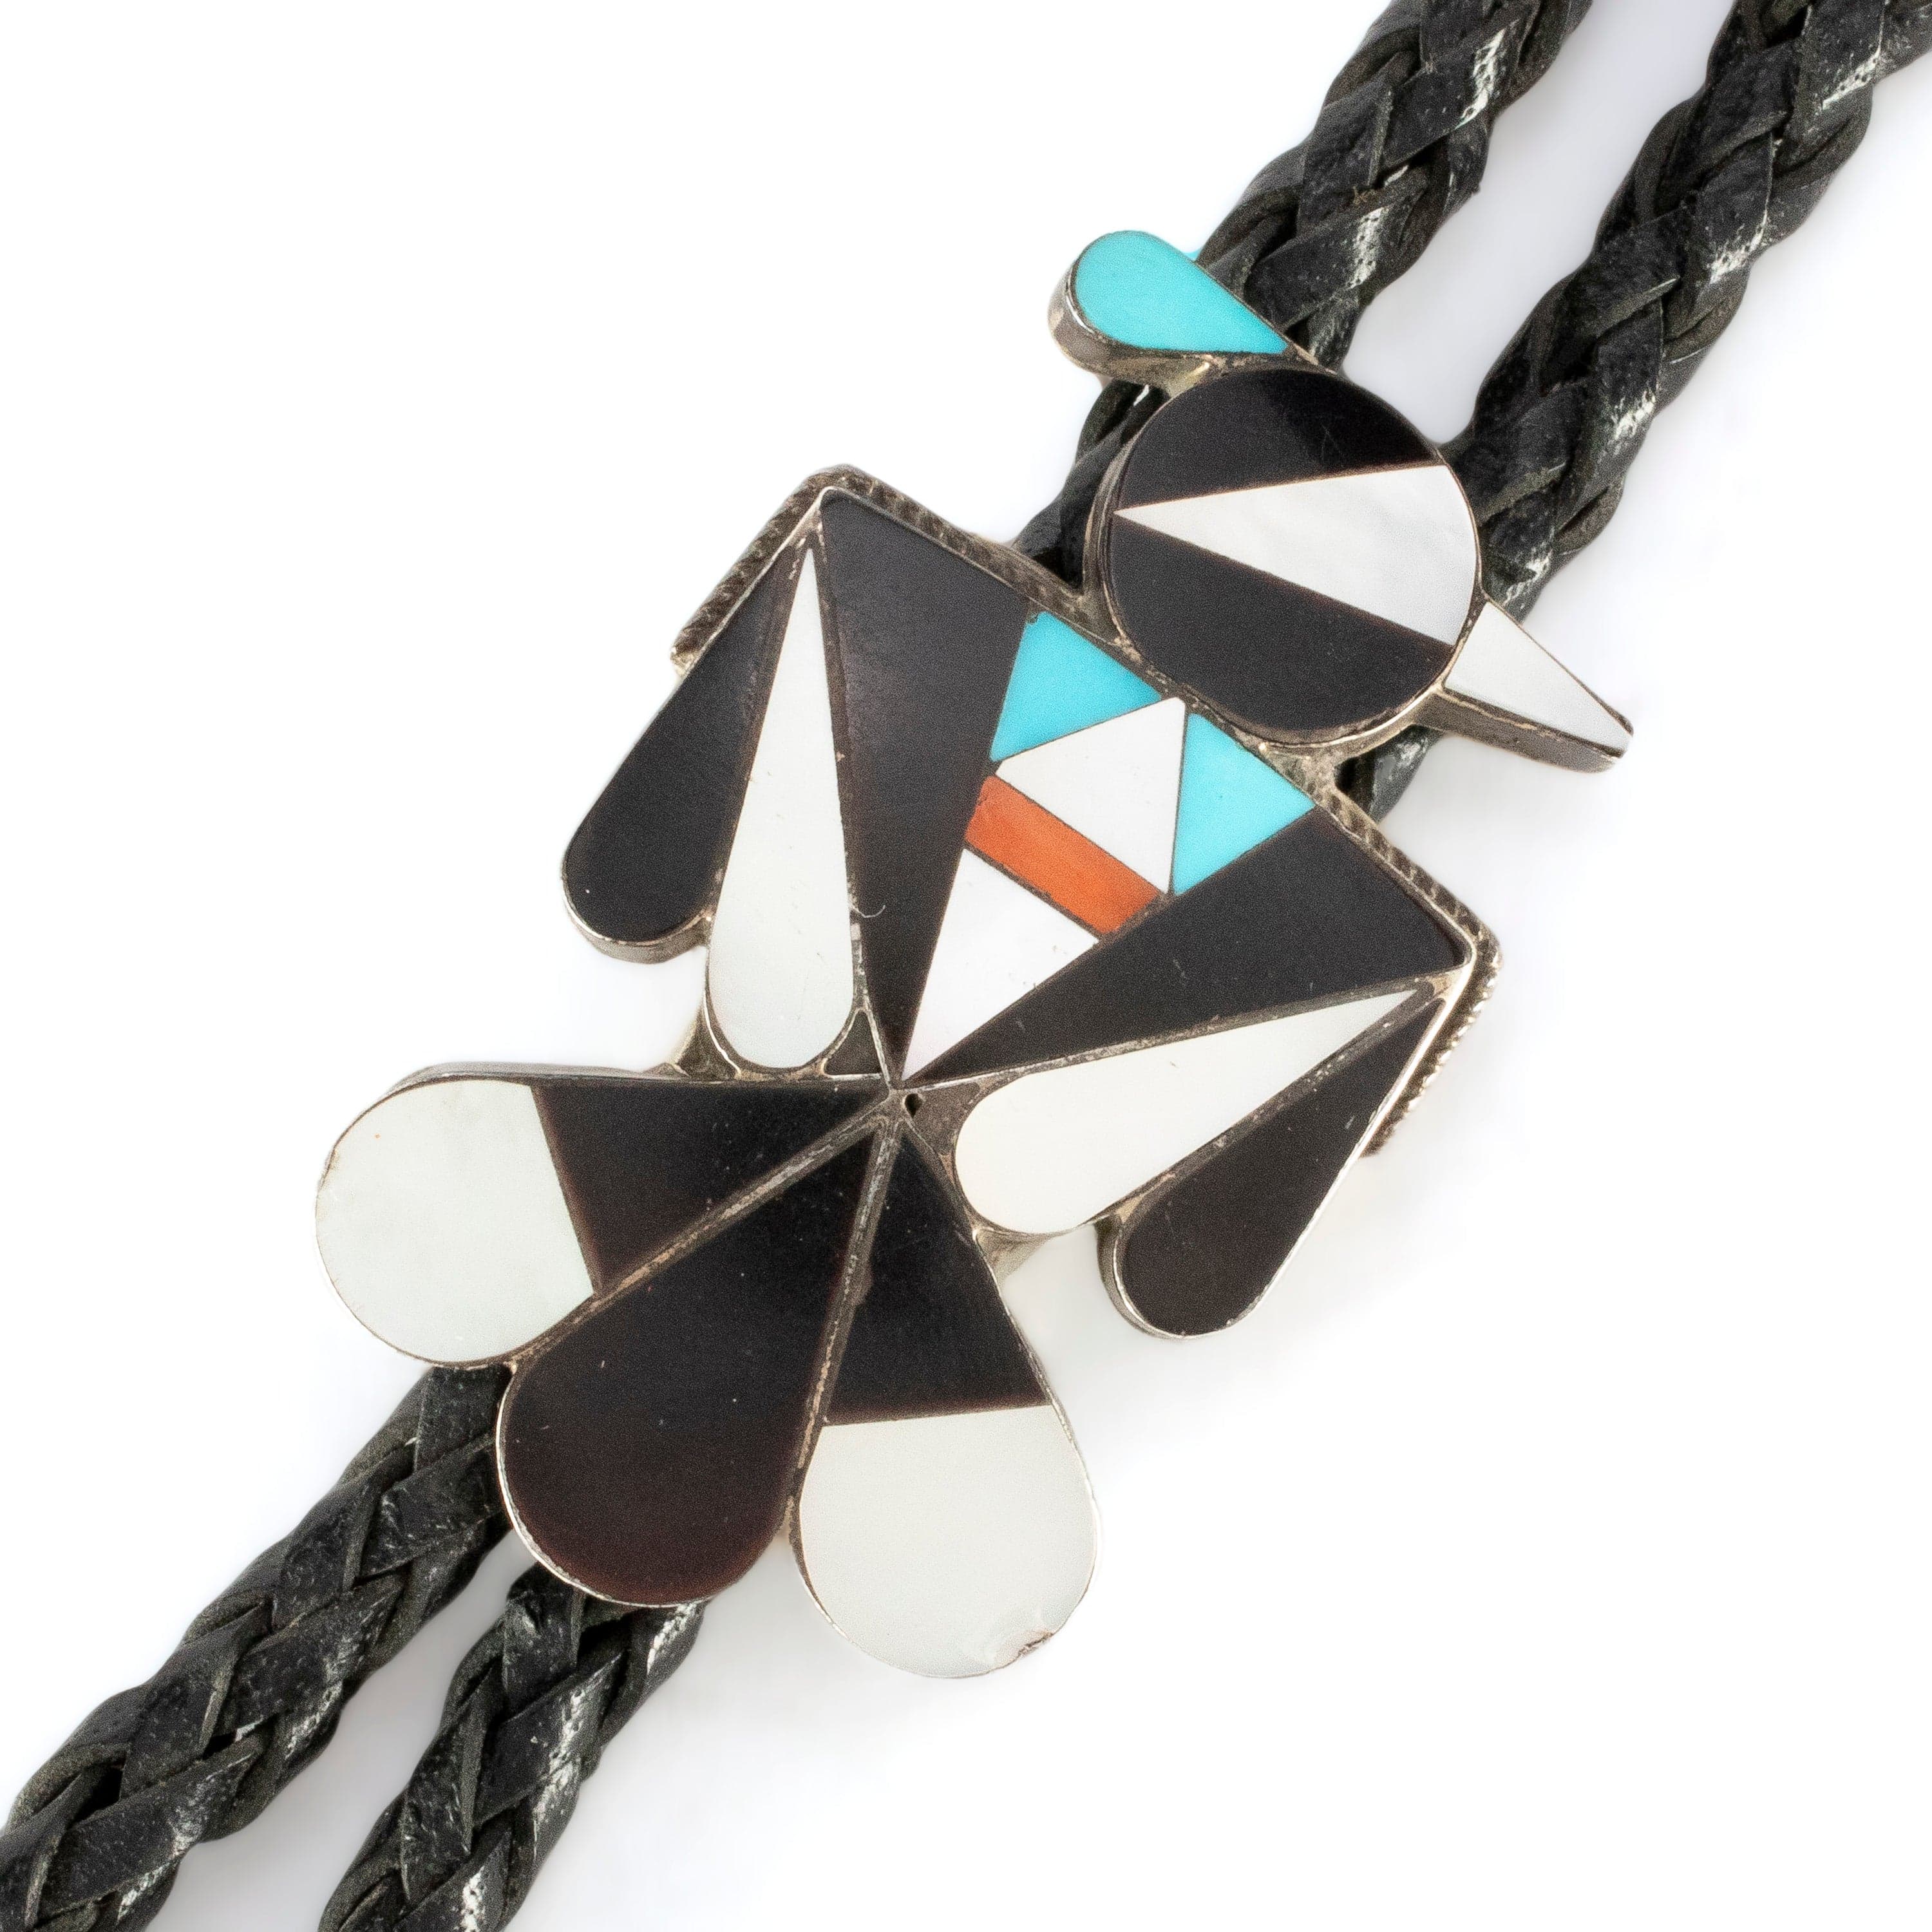 Kalifano Native American Jewelry Peyote Bird with Mother of Pearl, Turquoise, Coral, and Jet USA Native American Made 925 Sterling Silver Bolo Tie NABT400.001